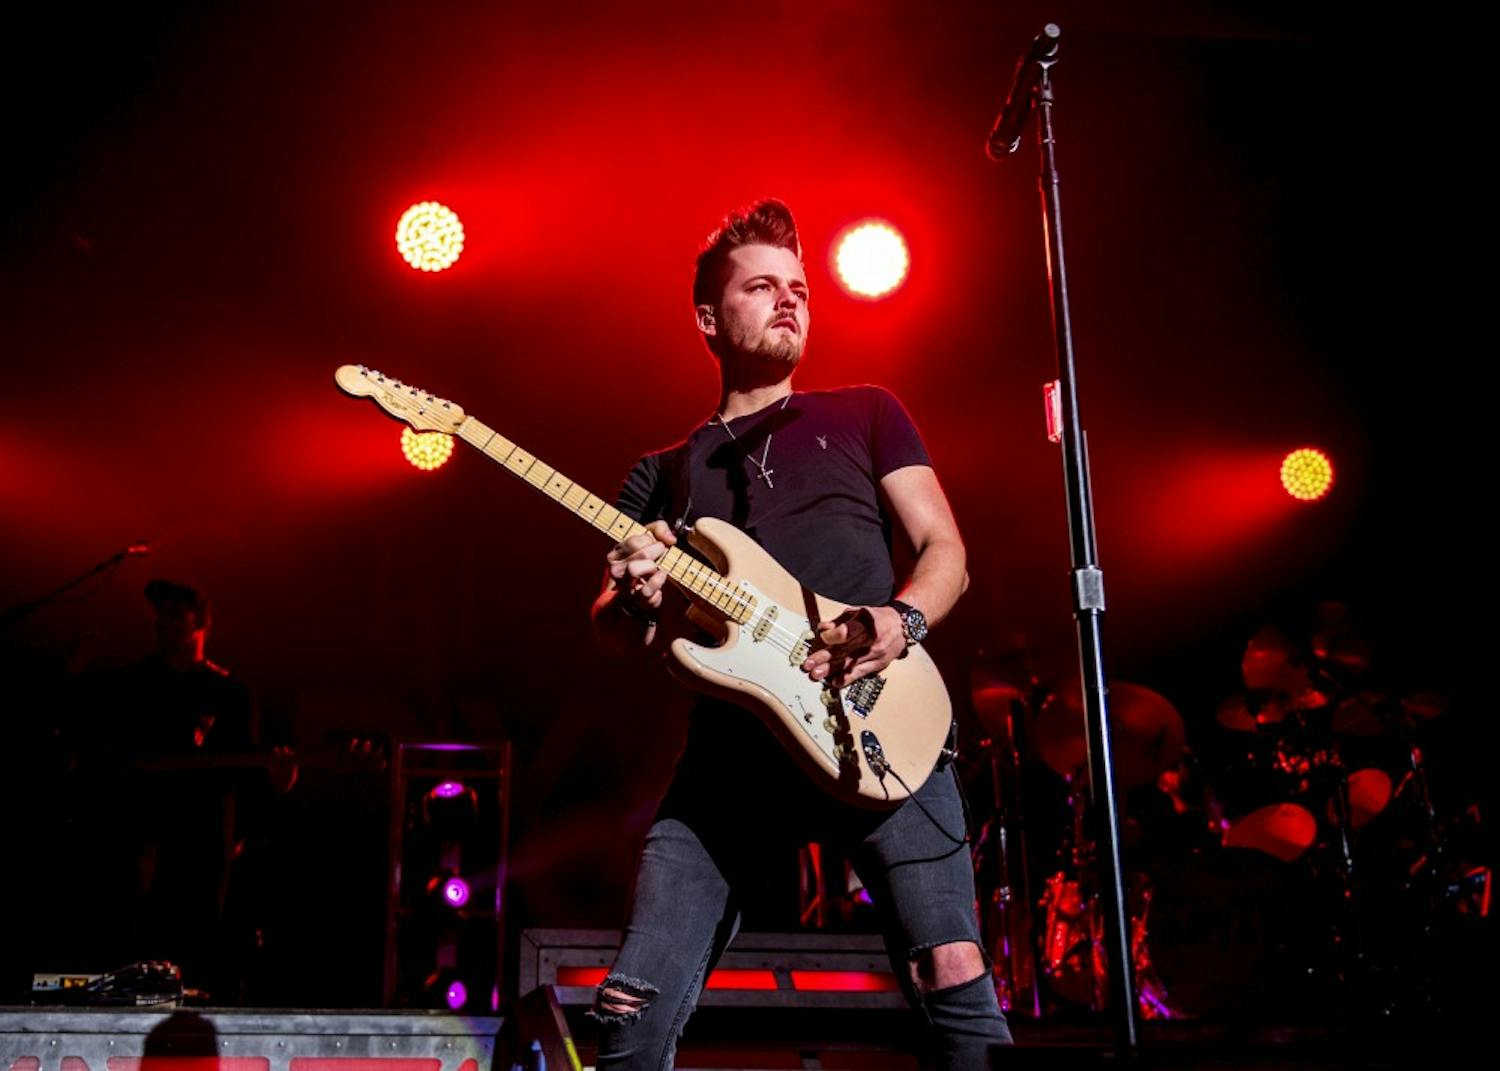 Countr artist Chase Bryant performed at Templeton Blackburn Alumni Memorial Auditorium on Thursday, April 13. This wasn't the first time Bryant has performed in Athens, as he performed at Country Night Lights in 2015. 